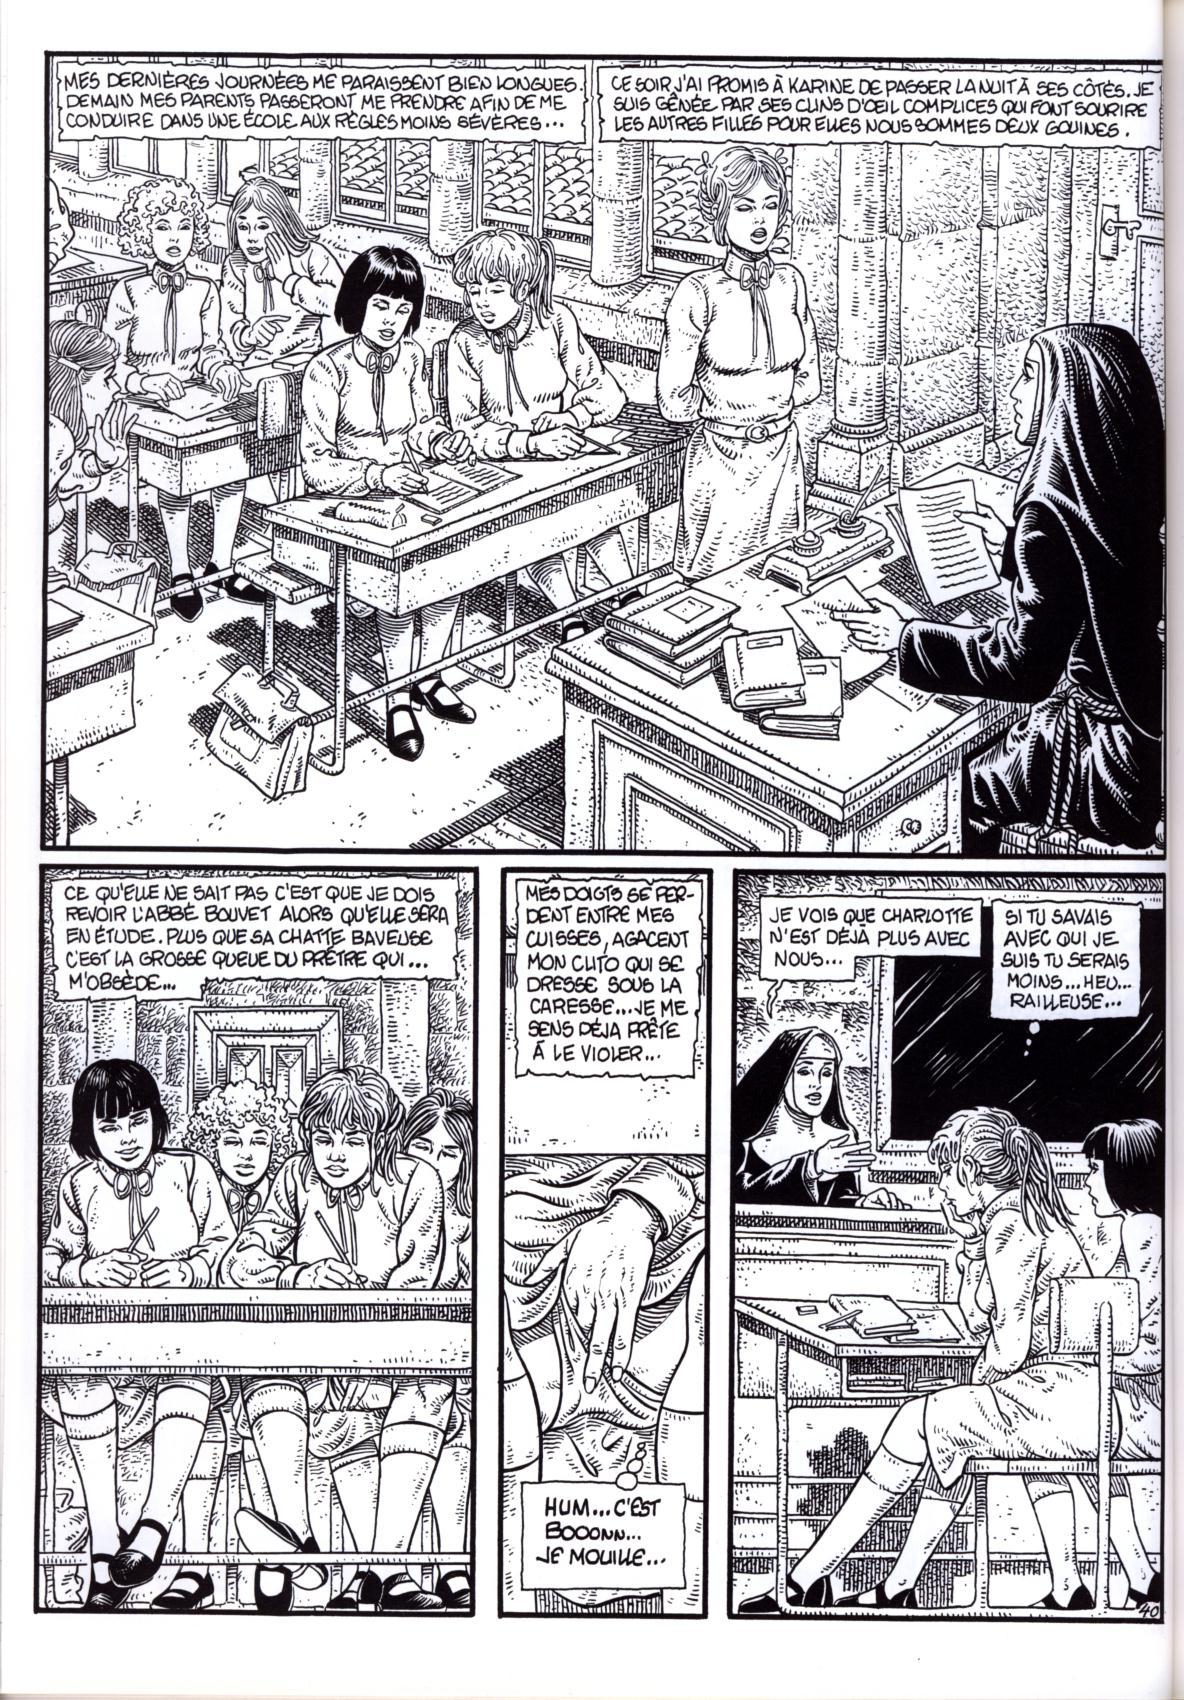 The Mary Magdalene Boarding School - Volume 3 numero d'image 42